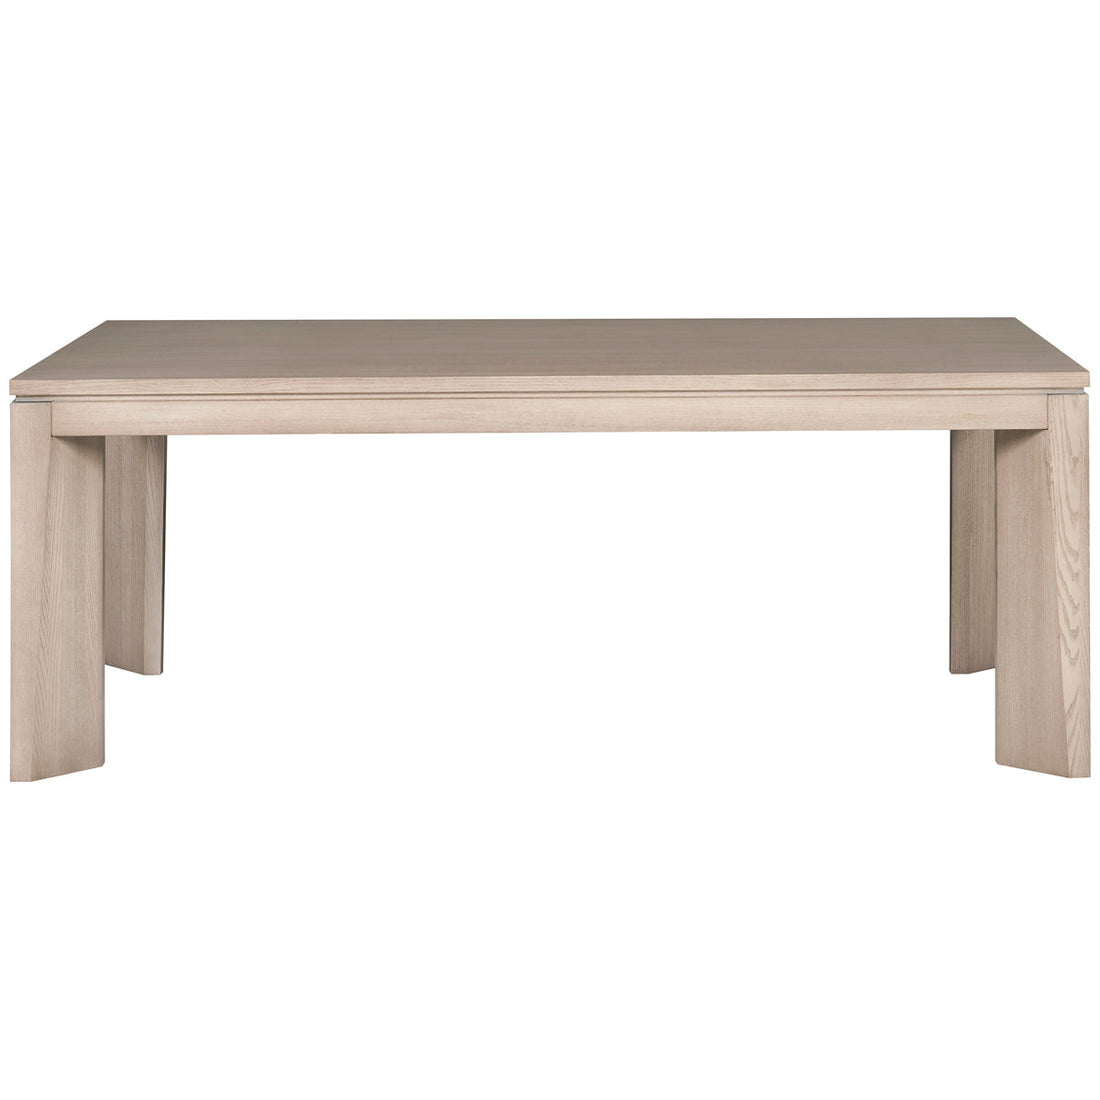 Vanguard Furniture Wedge Dining Table with Wedge Leg